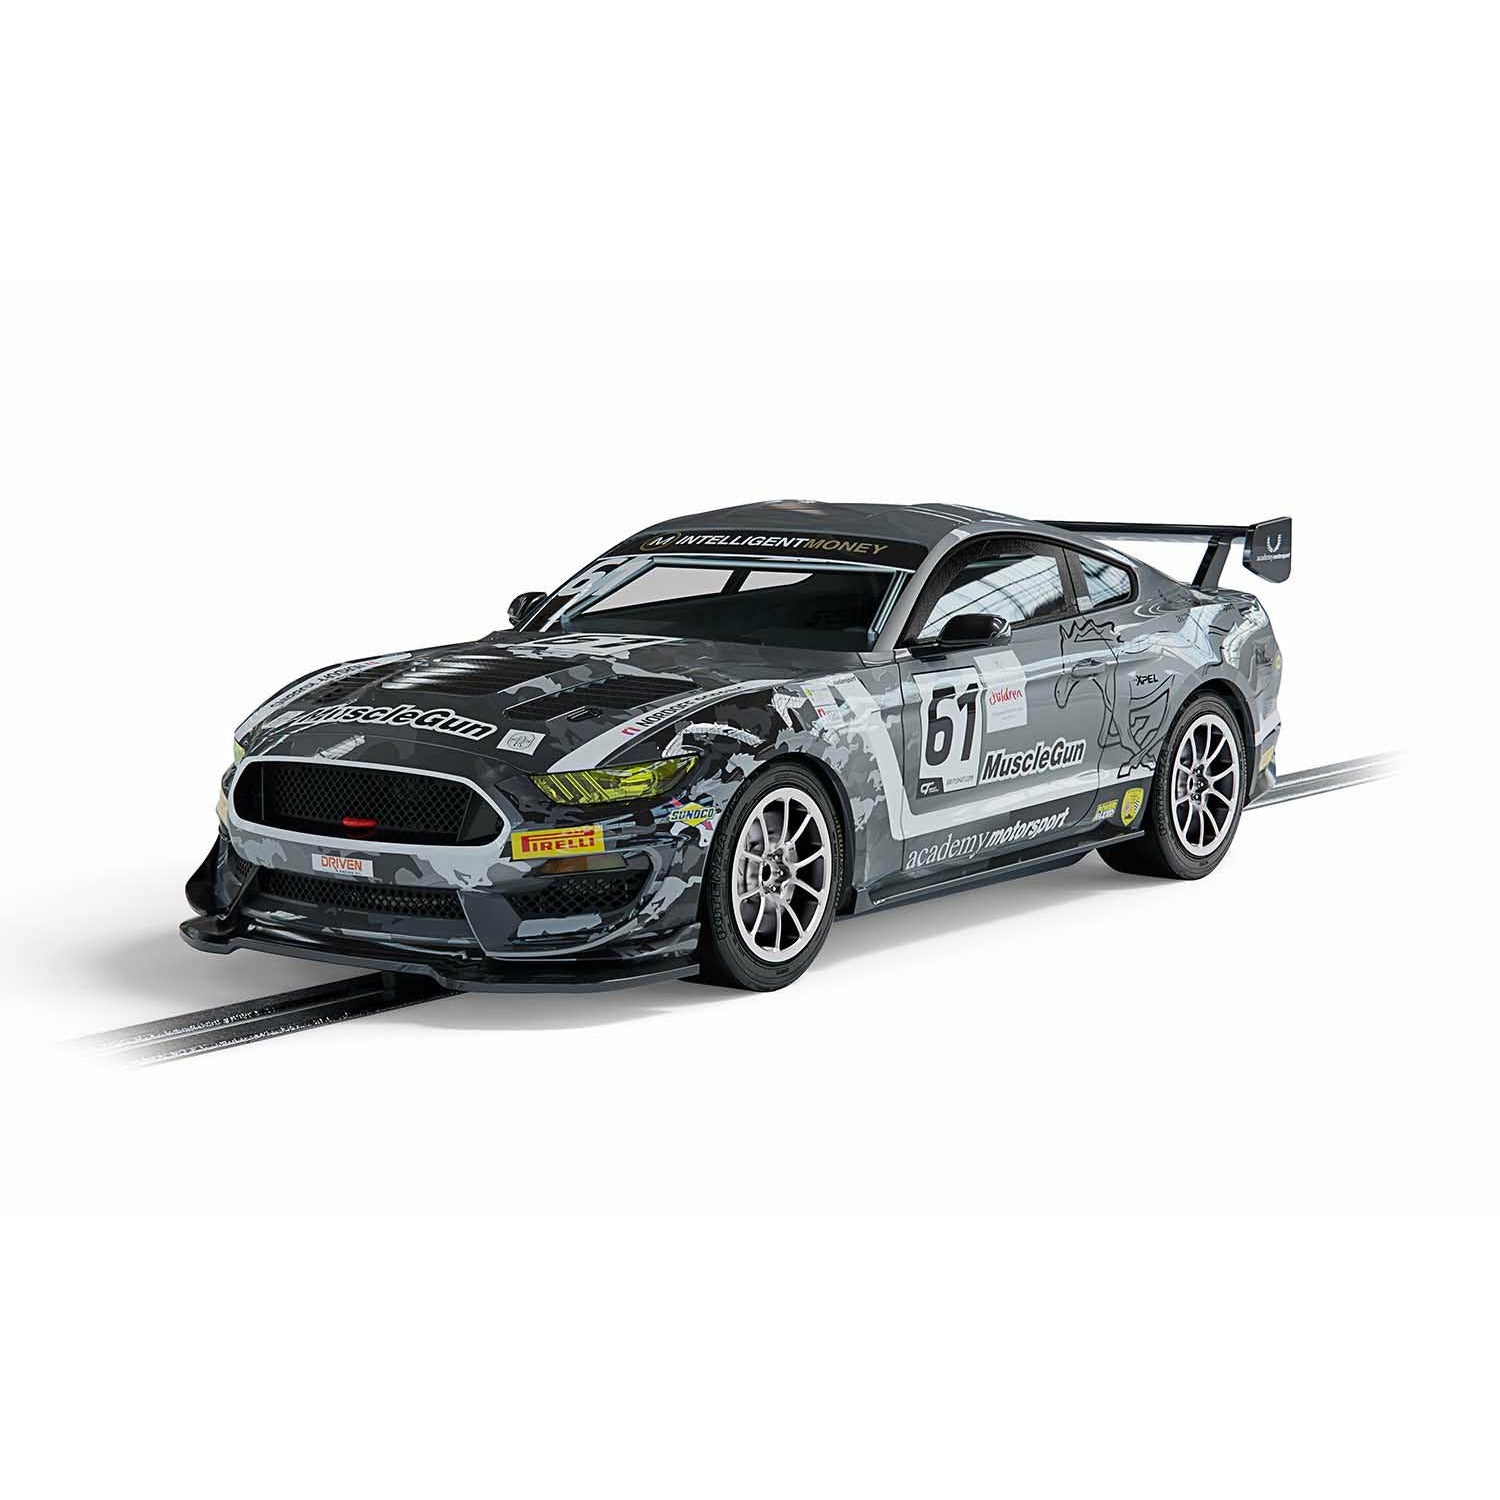 2020 Ford Mustang GT4 Academy Motorsport Scalextric Slot Car